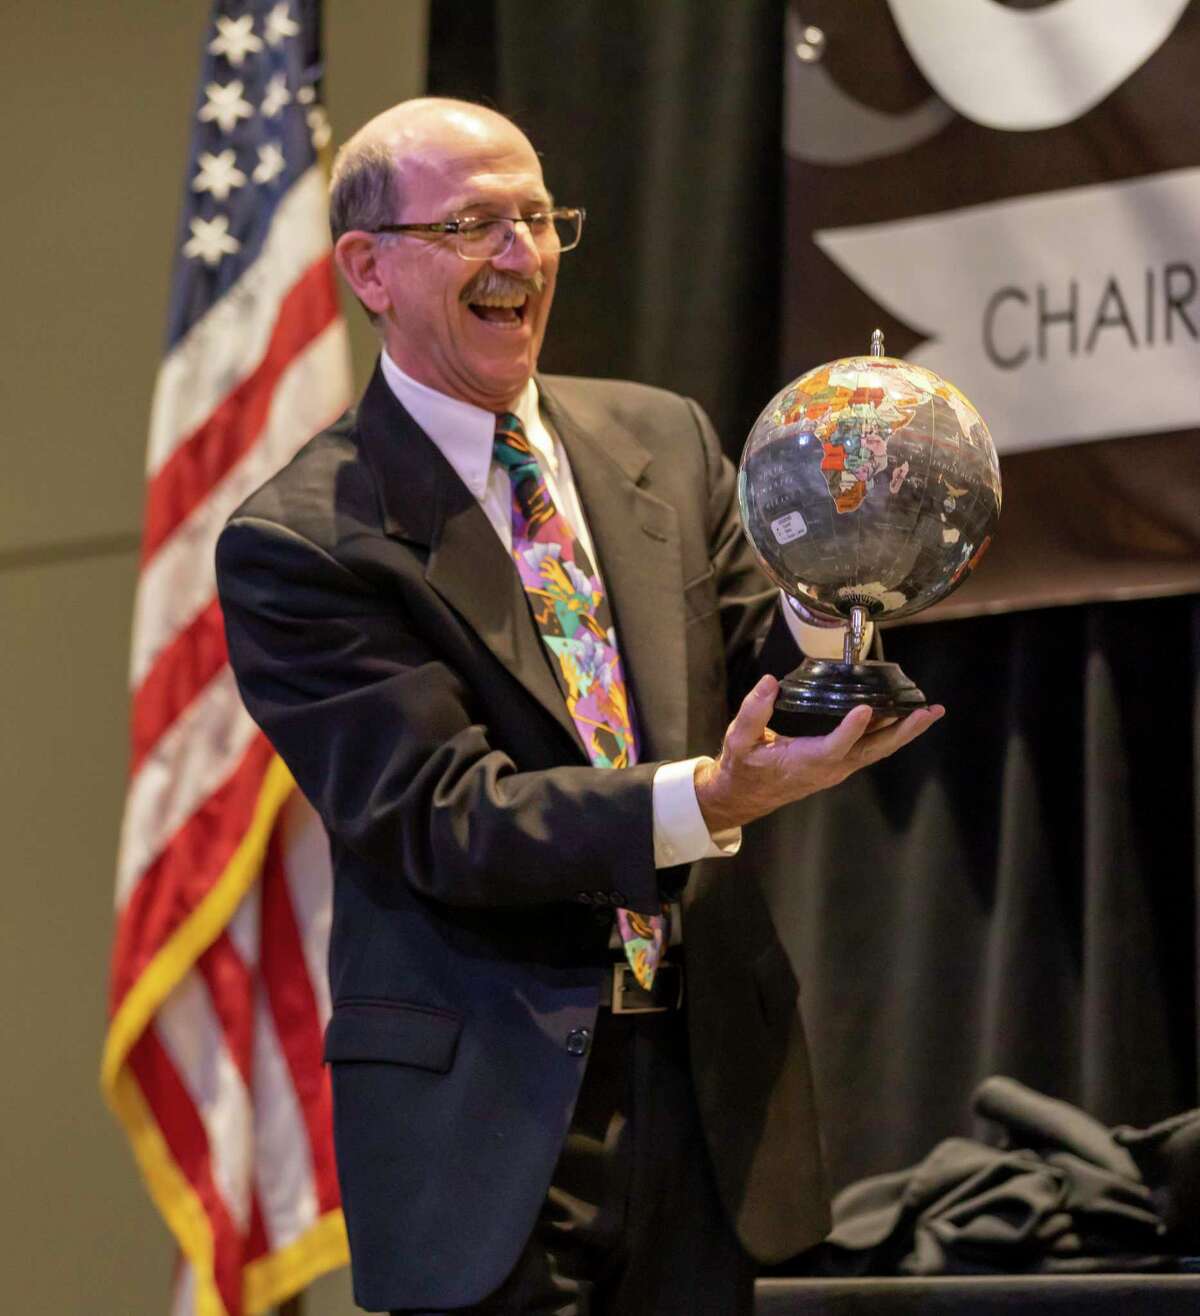 President of the Conroe/Lake Conroe Chamber of Commerce, Brian Bondy, presents a globe to outgoing chairman Brent Wunderlich as a thank you for his time as president at Lone Star Convention Center in Conroe, Thursday, Jan. 23, 2020.